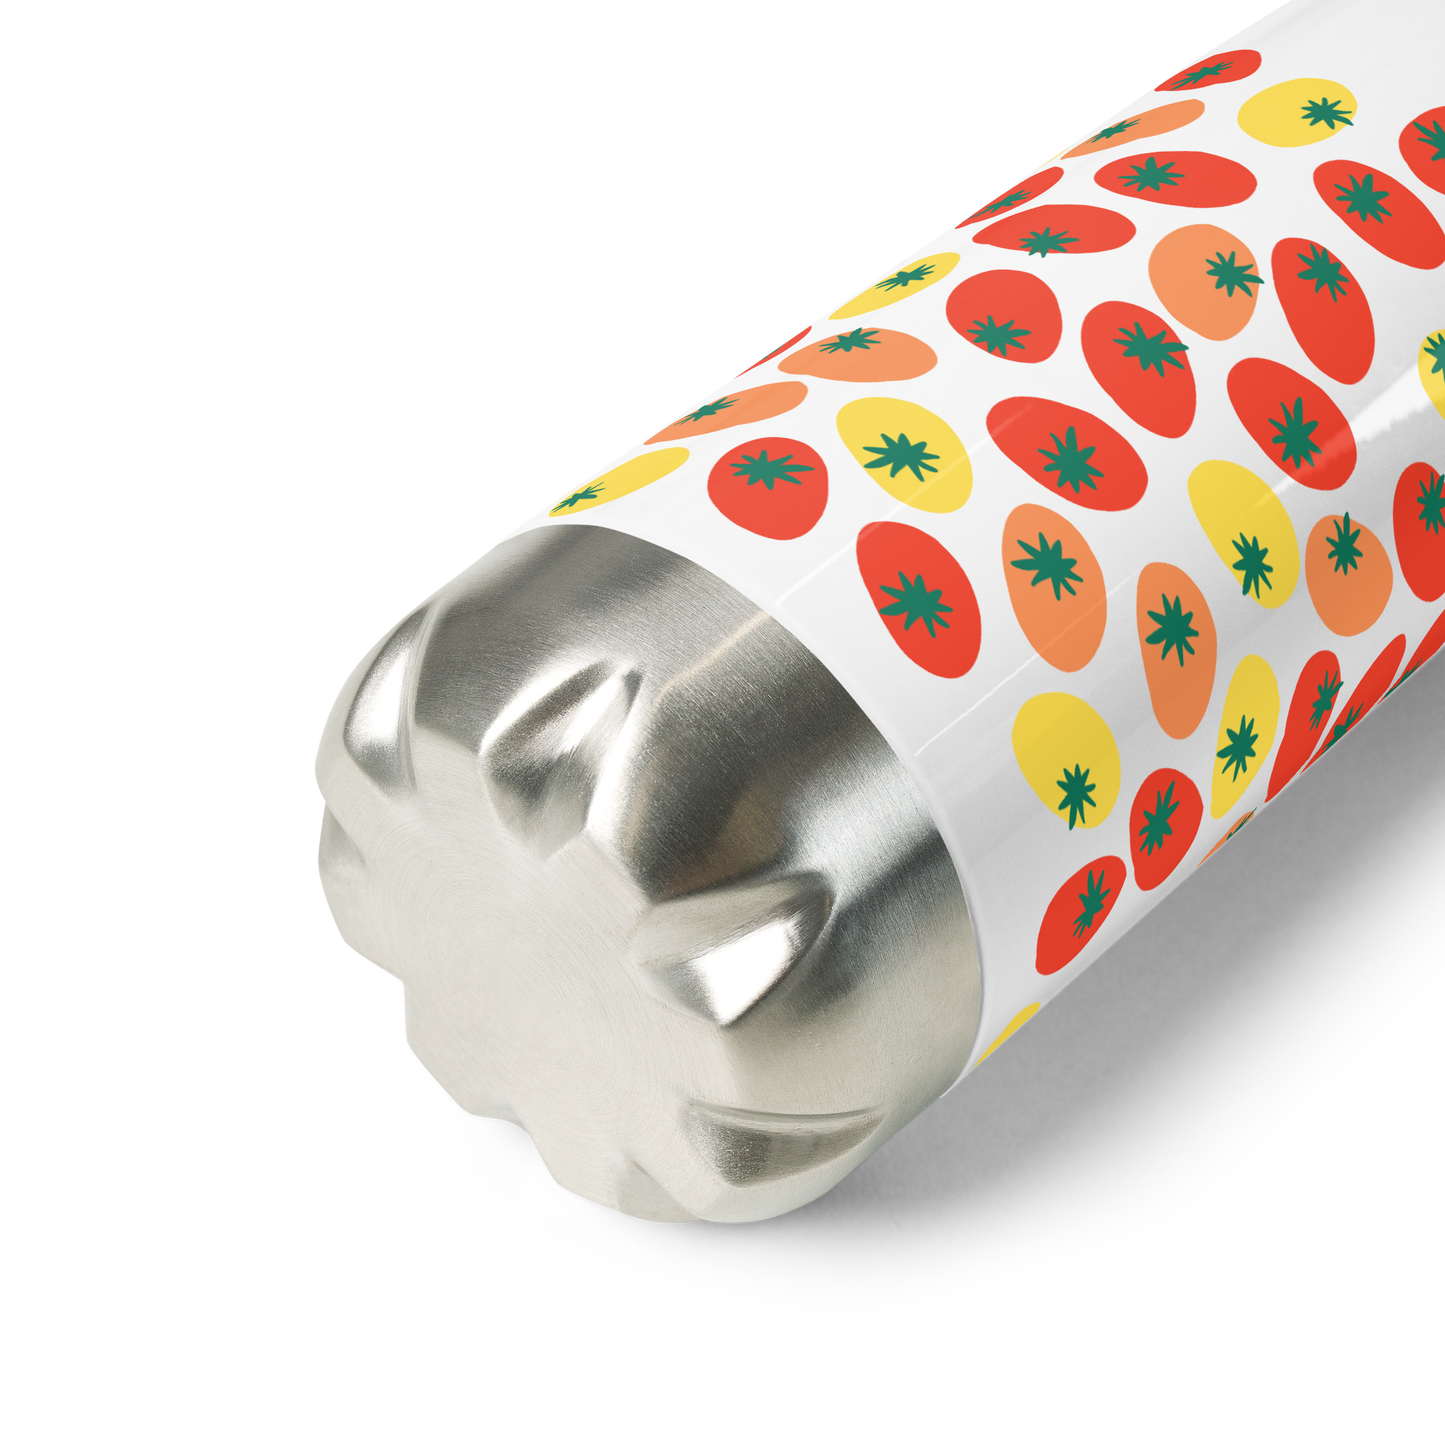 Ferry-Morse "Tomato" Stainless Steel Water Bottle